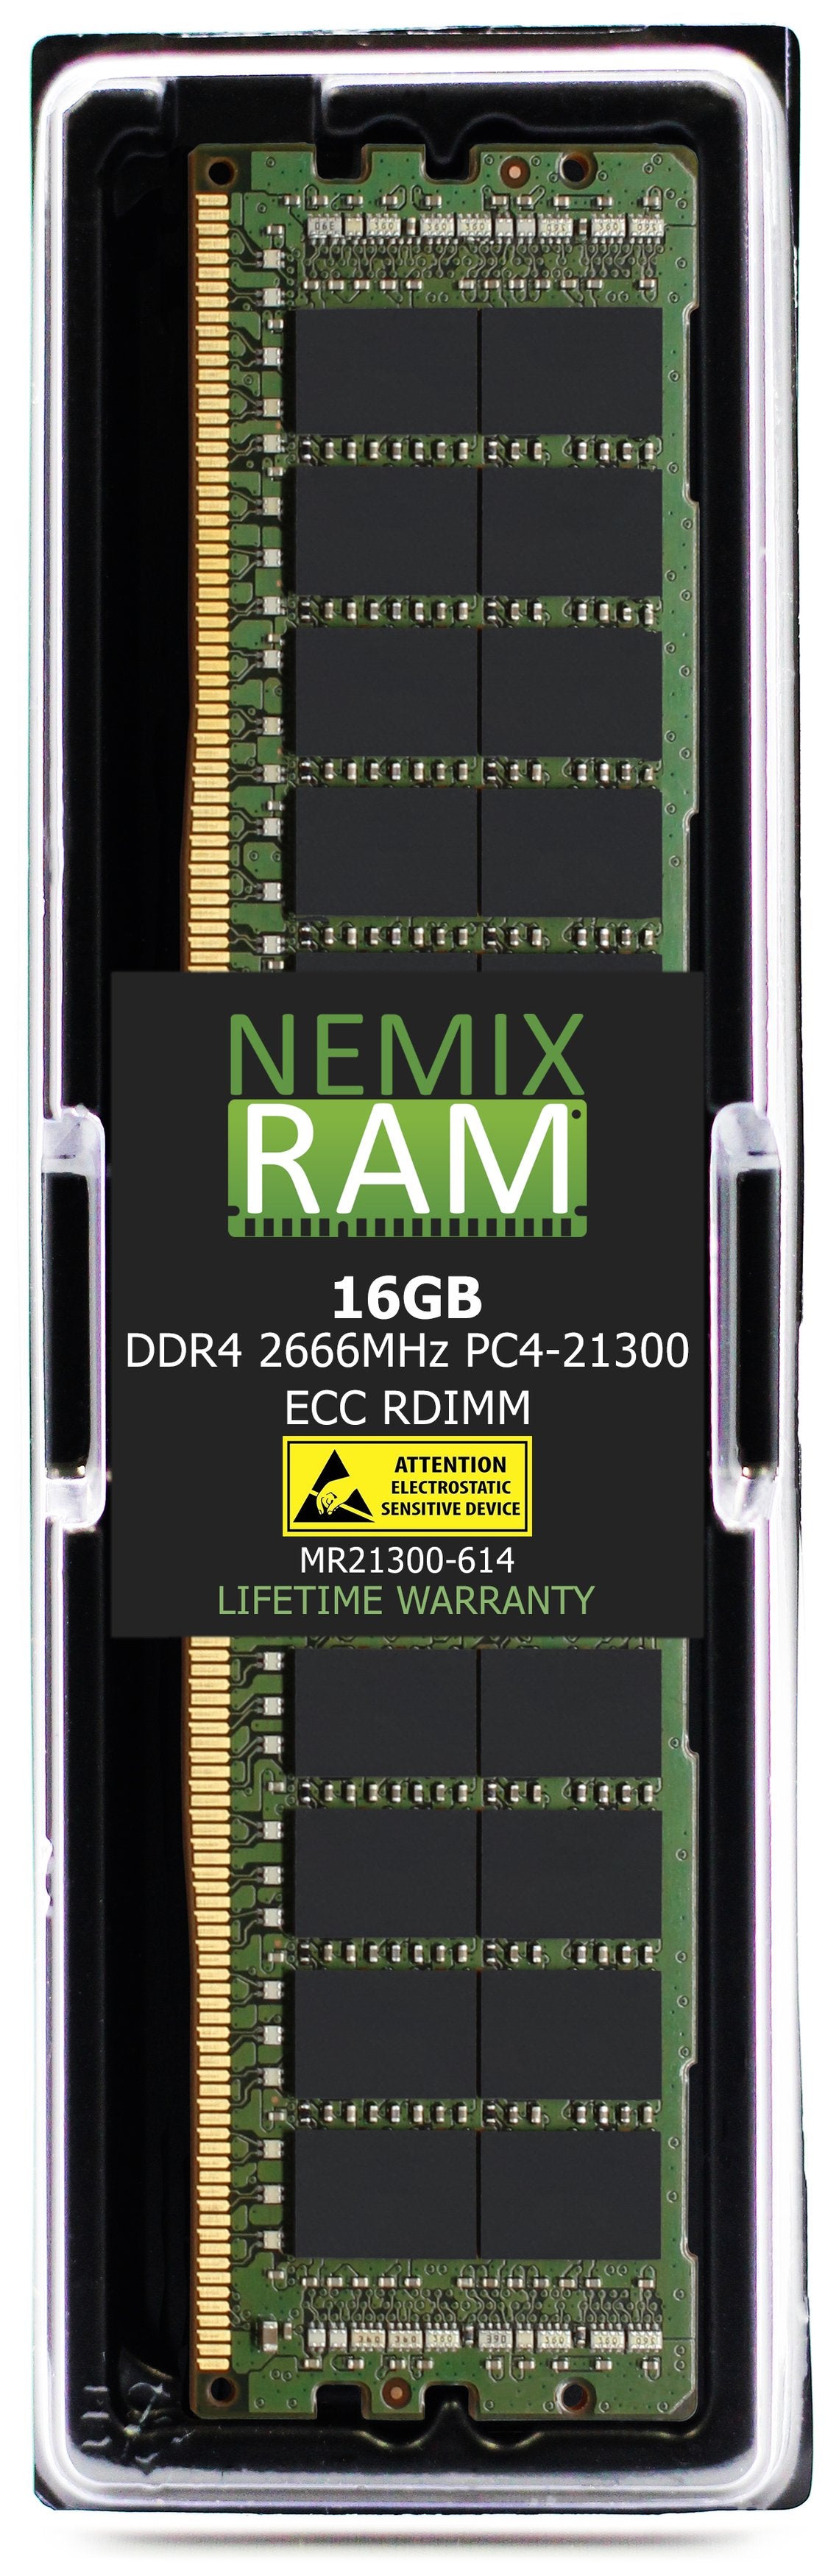 DDR4 2666MHZ PC4-21300 RDIMM Compatible with Synology SA3600